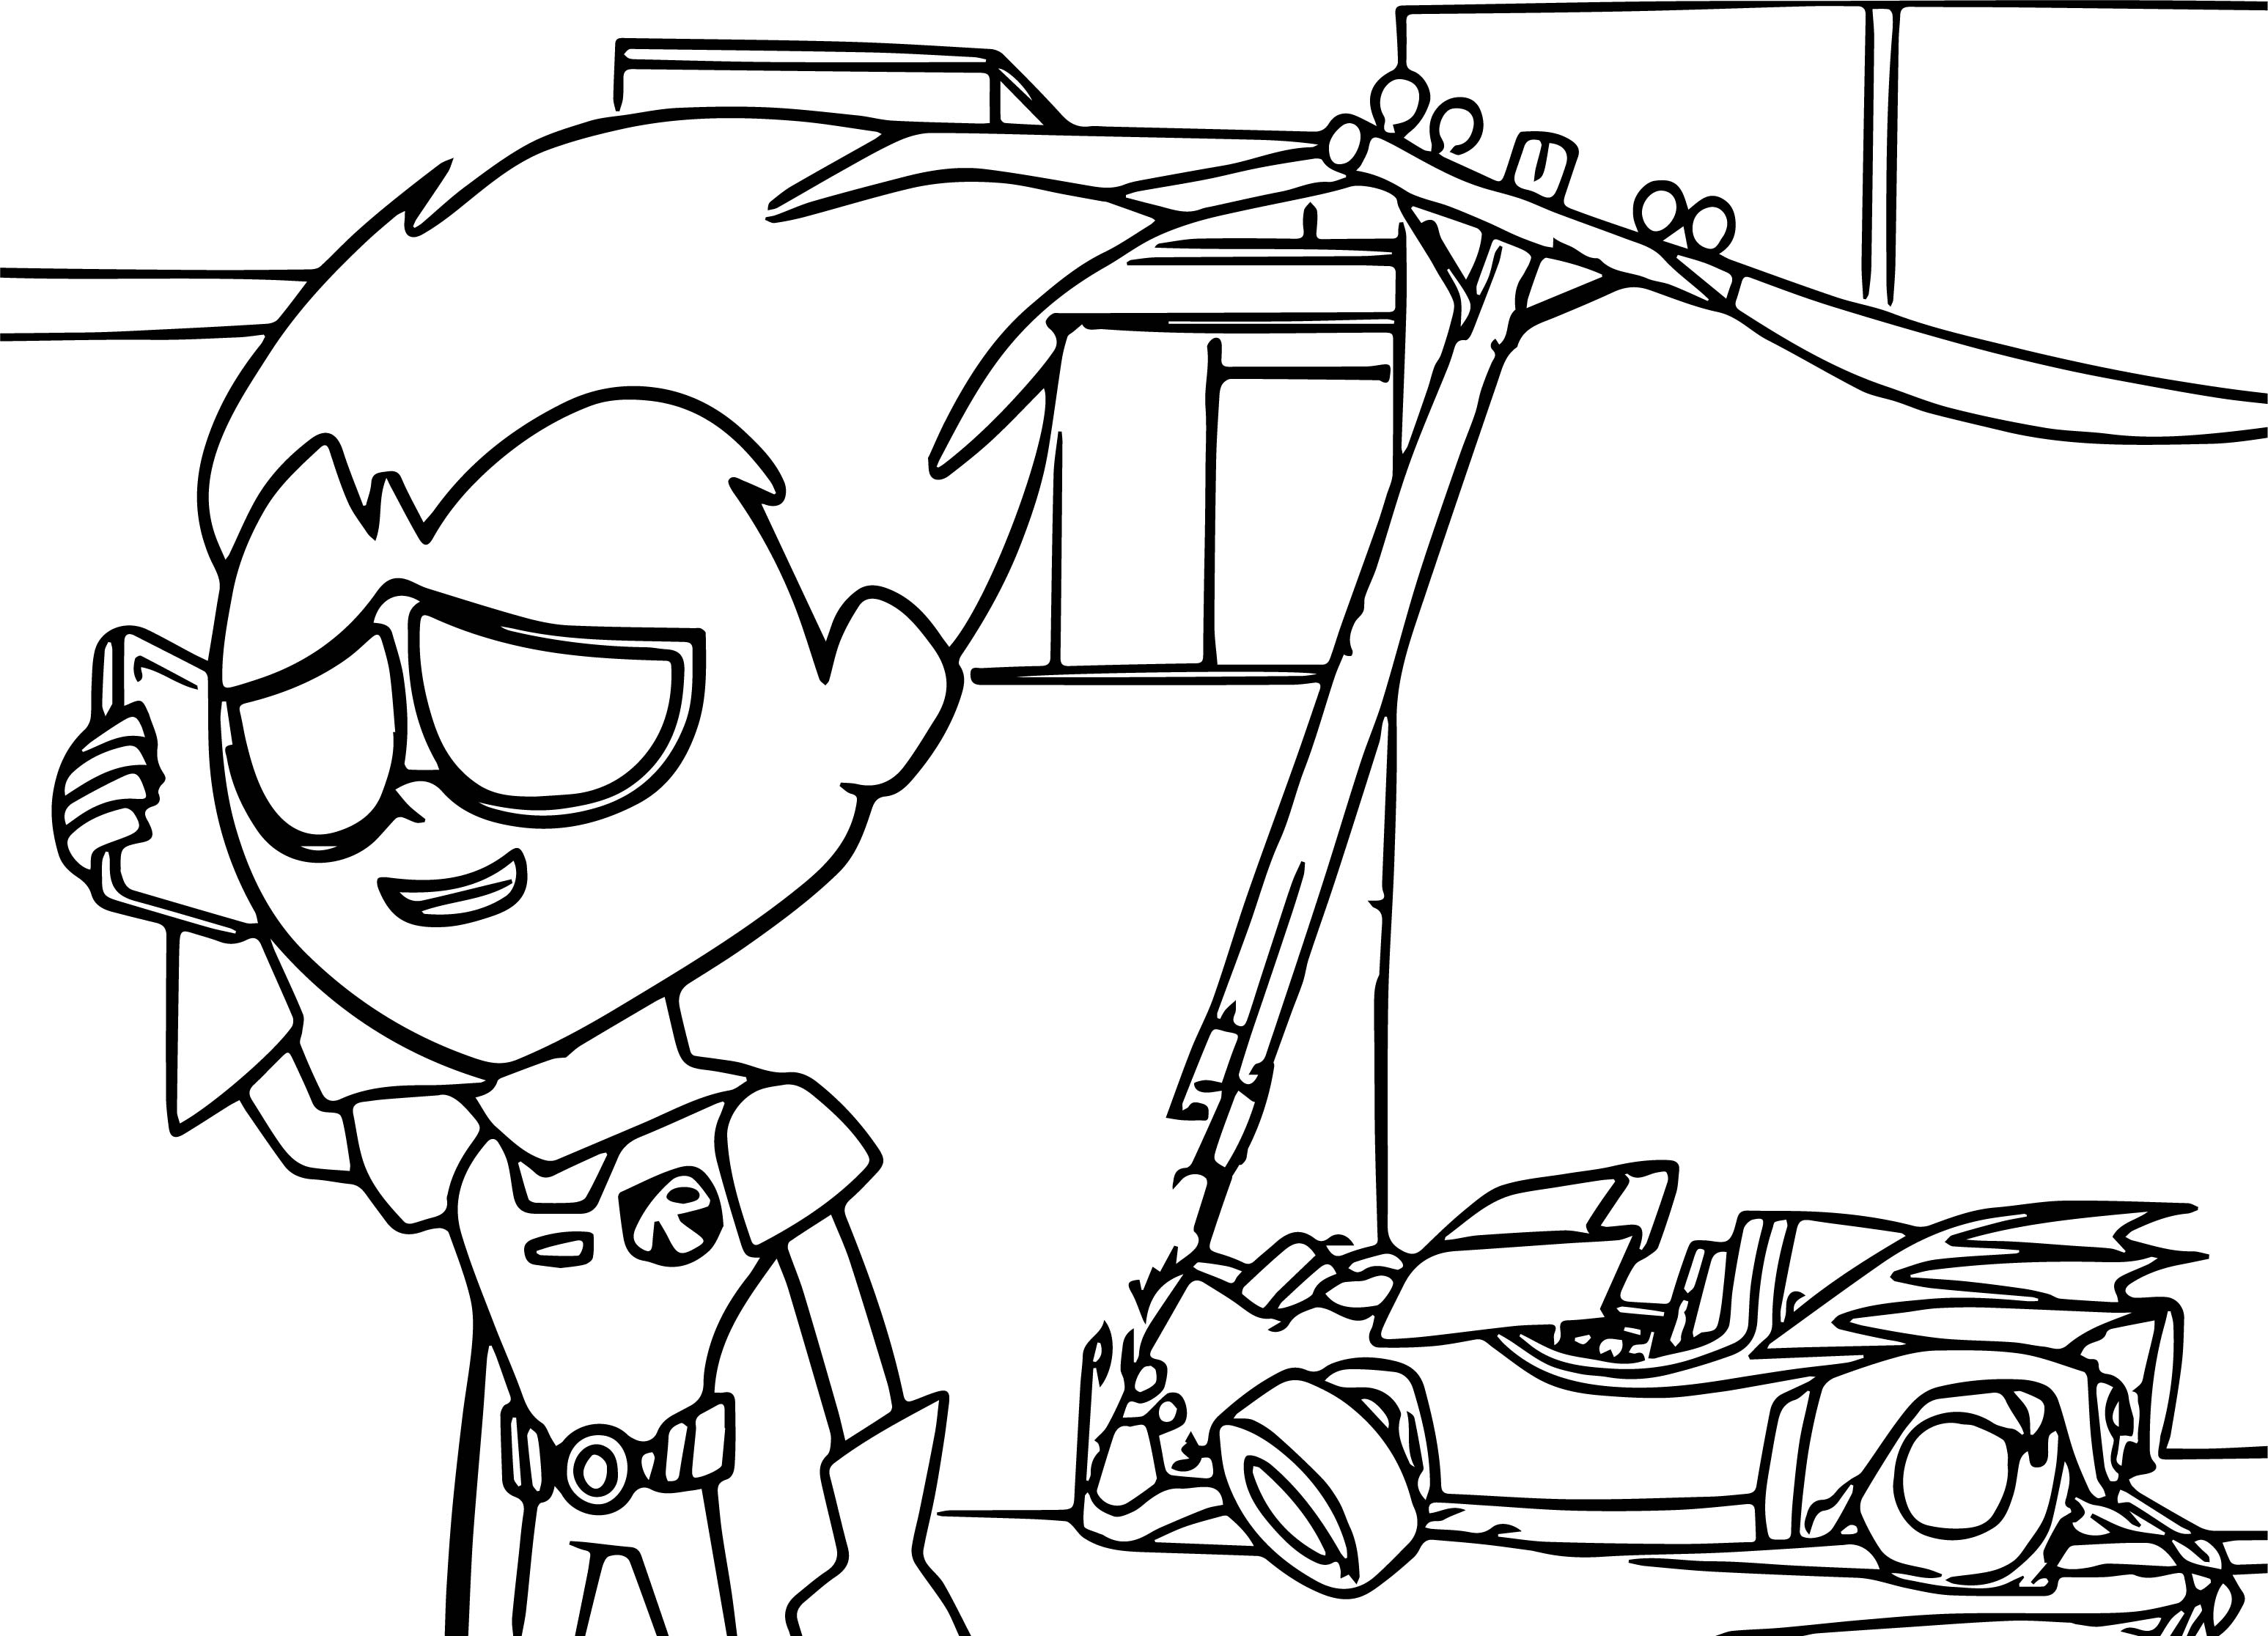 Cartoon Coloring Pages - Best Coloring Pages For Kids